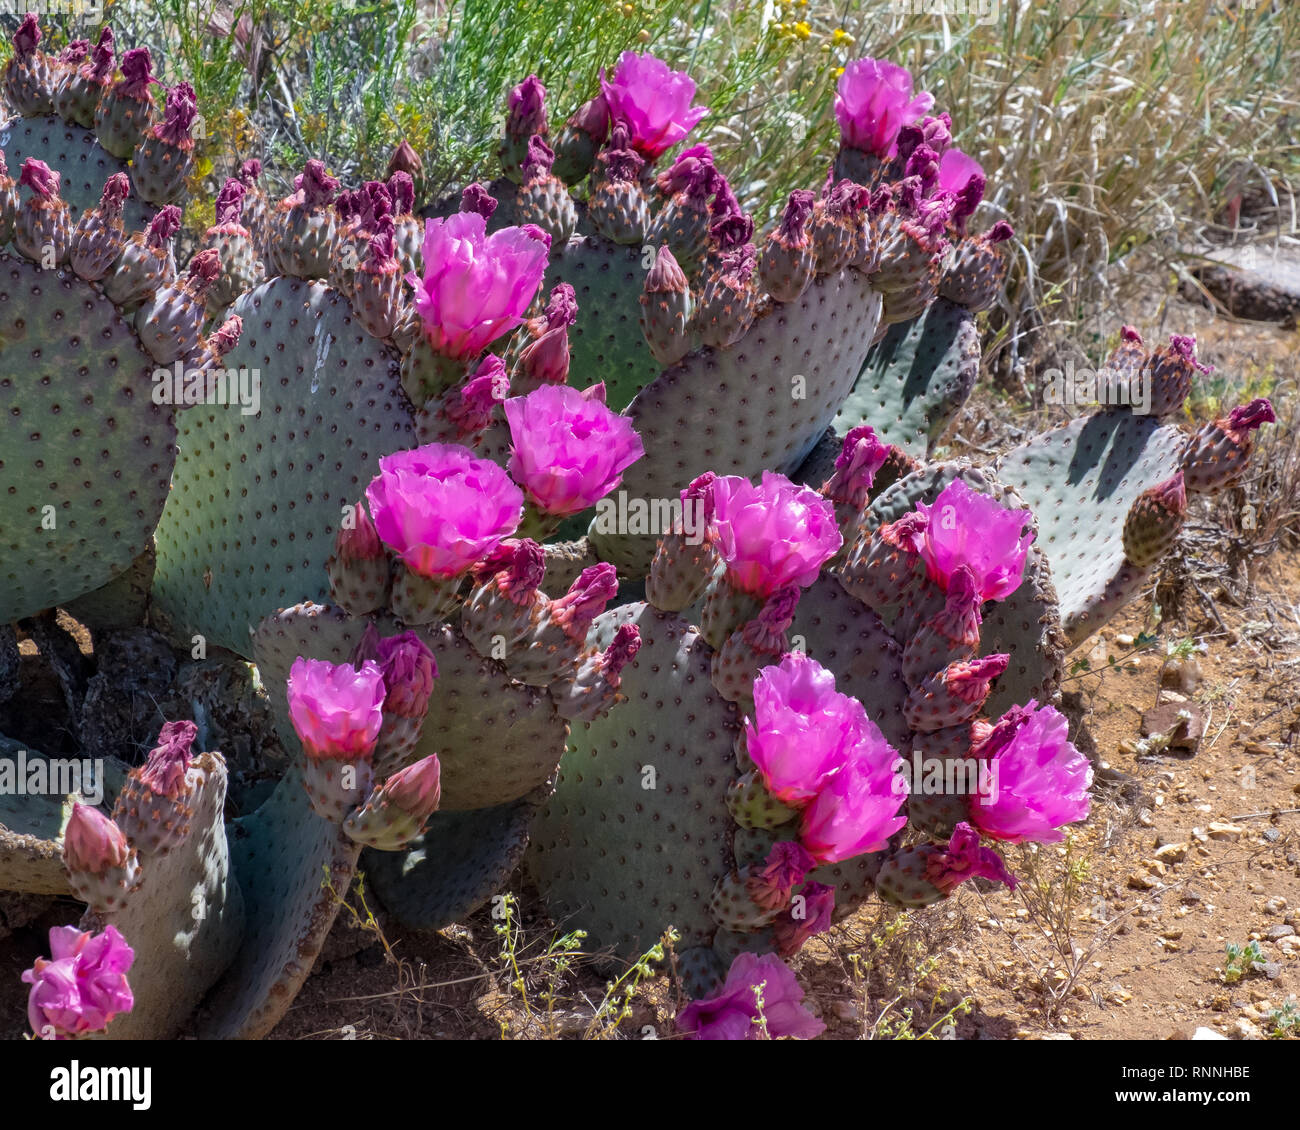 USA, Arizona, Coconino County, Grand Canyon National Park. The rose colored pink flowers of beaver tail prickleypear cactus (Opuntia basilaris) Stock Photo